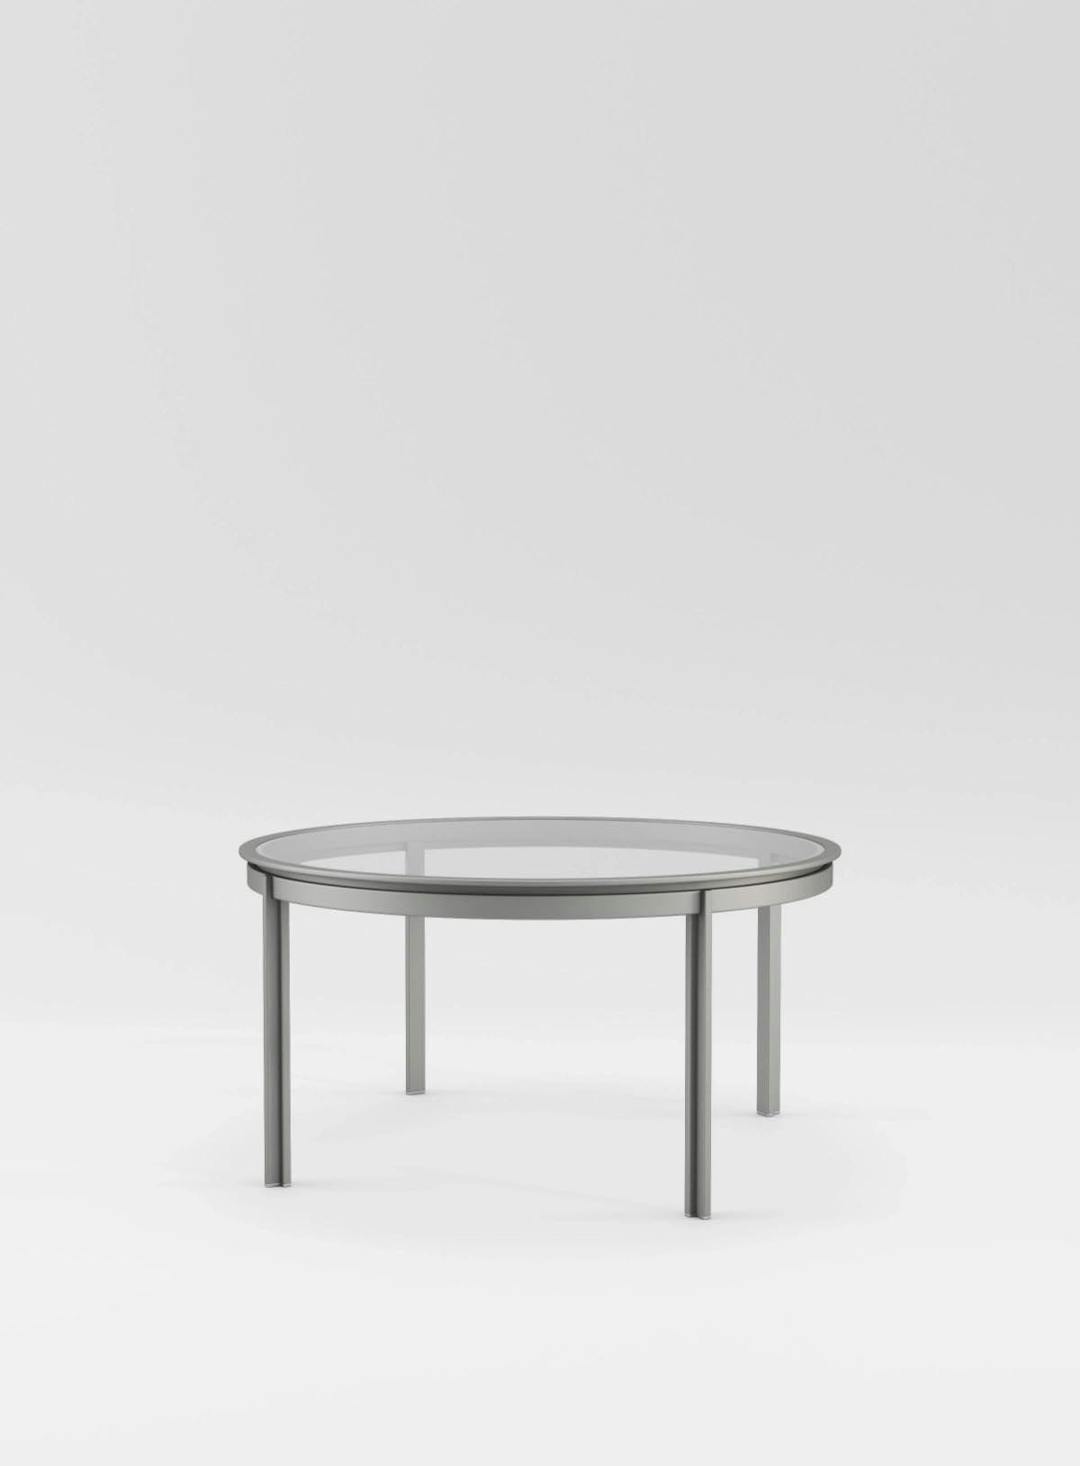 Swim 54" Round Dining Table, Glass Top